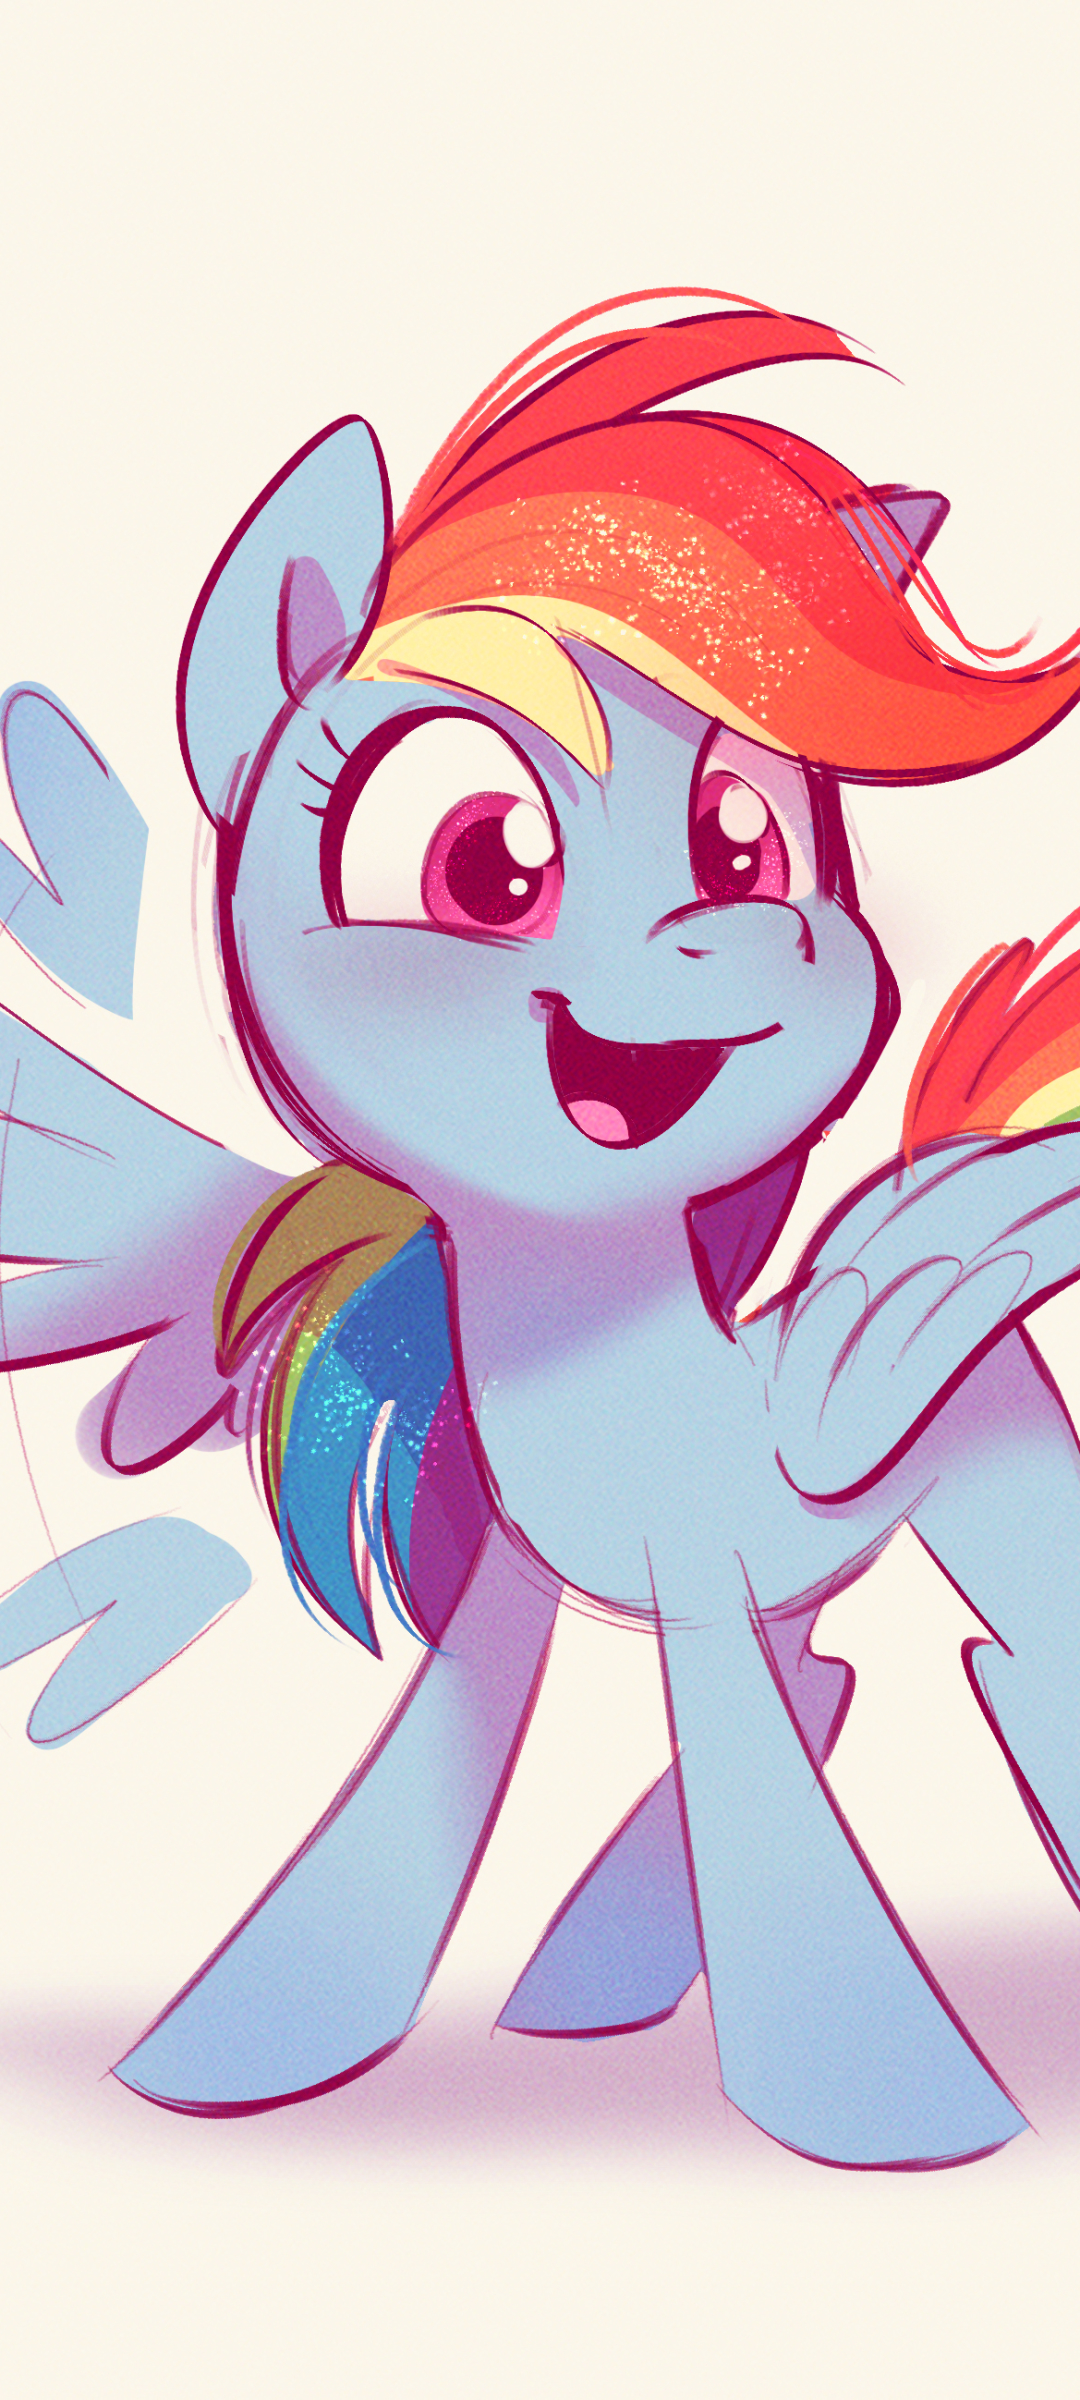 My Little Pony: Friendship is Magic Phone Wallpaper by Imalou